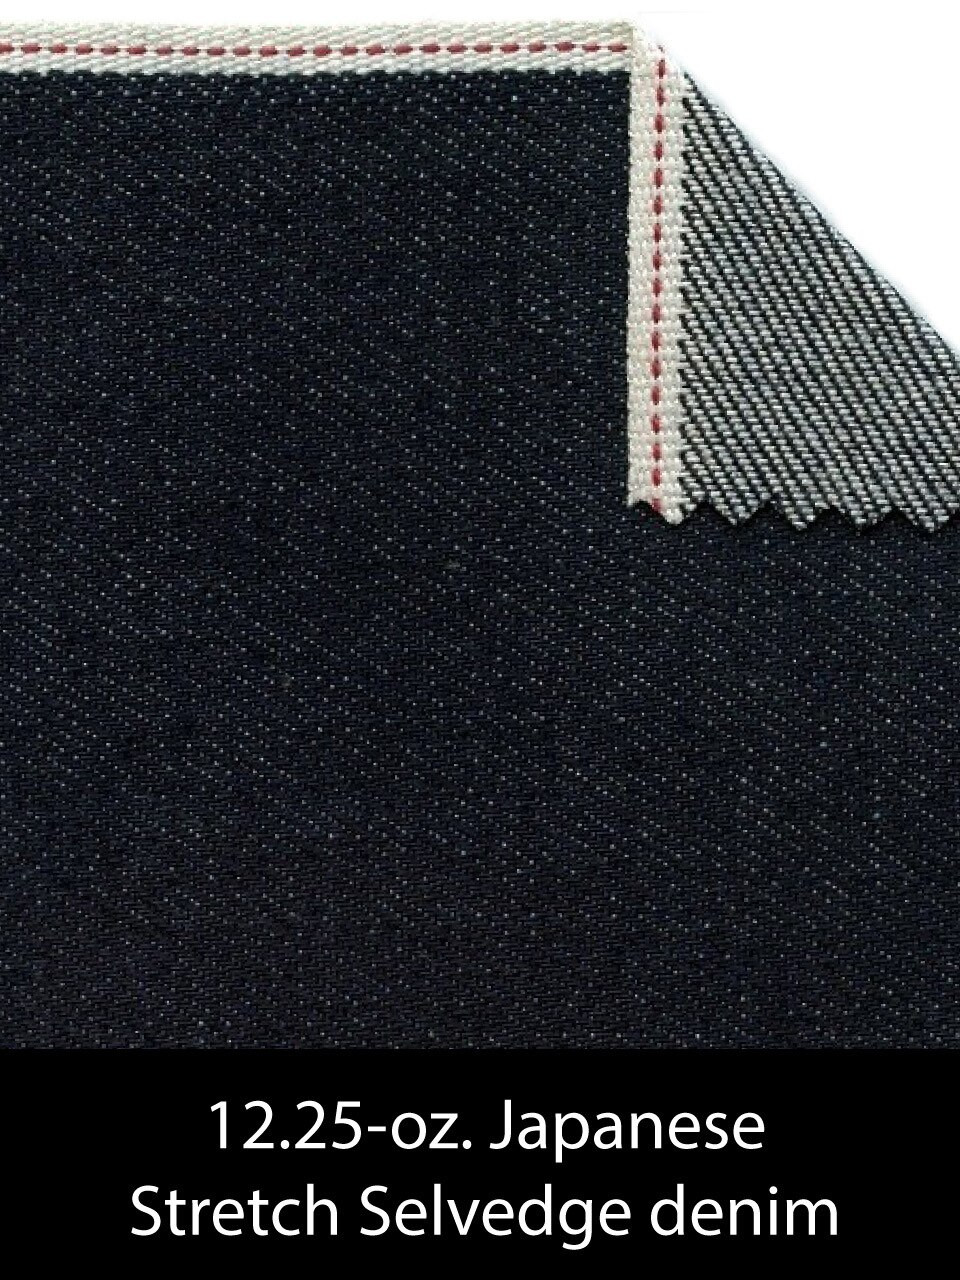 10 Pairs Of Raw Denim With 34+ Inseams